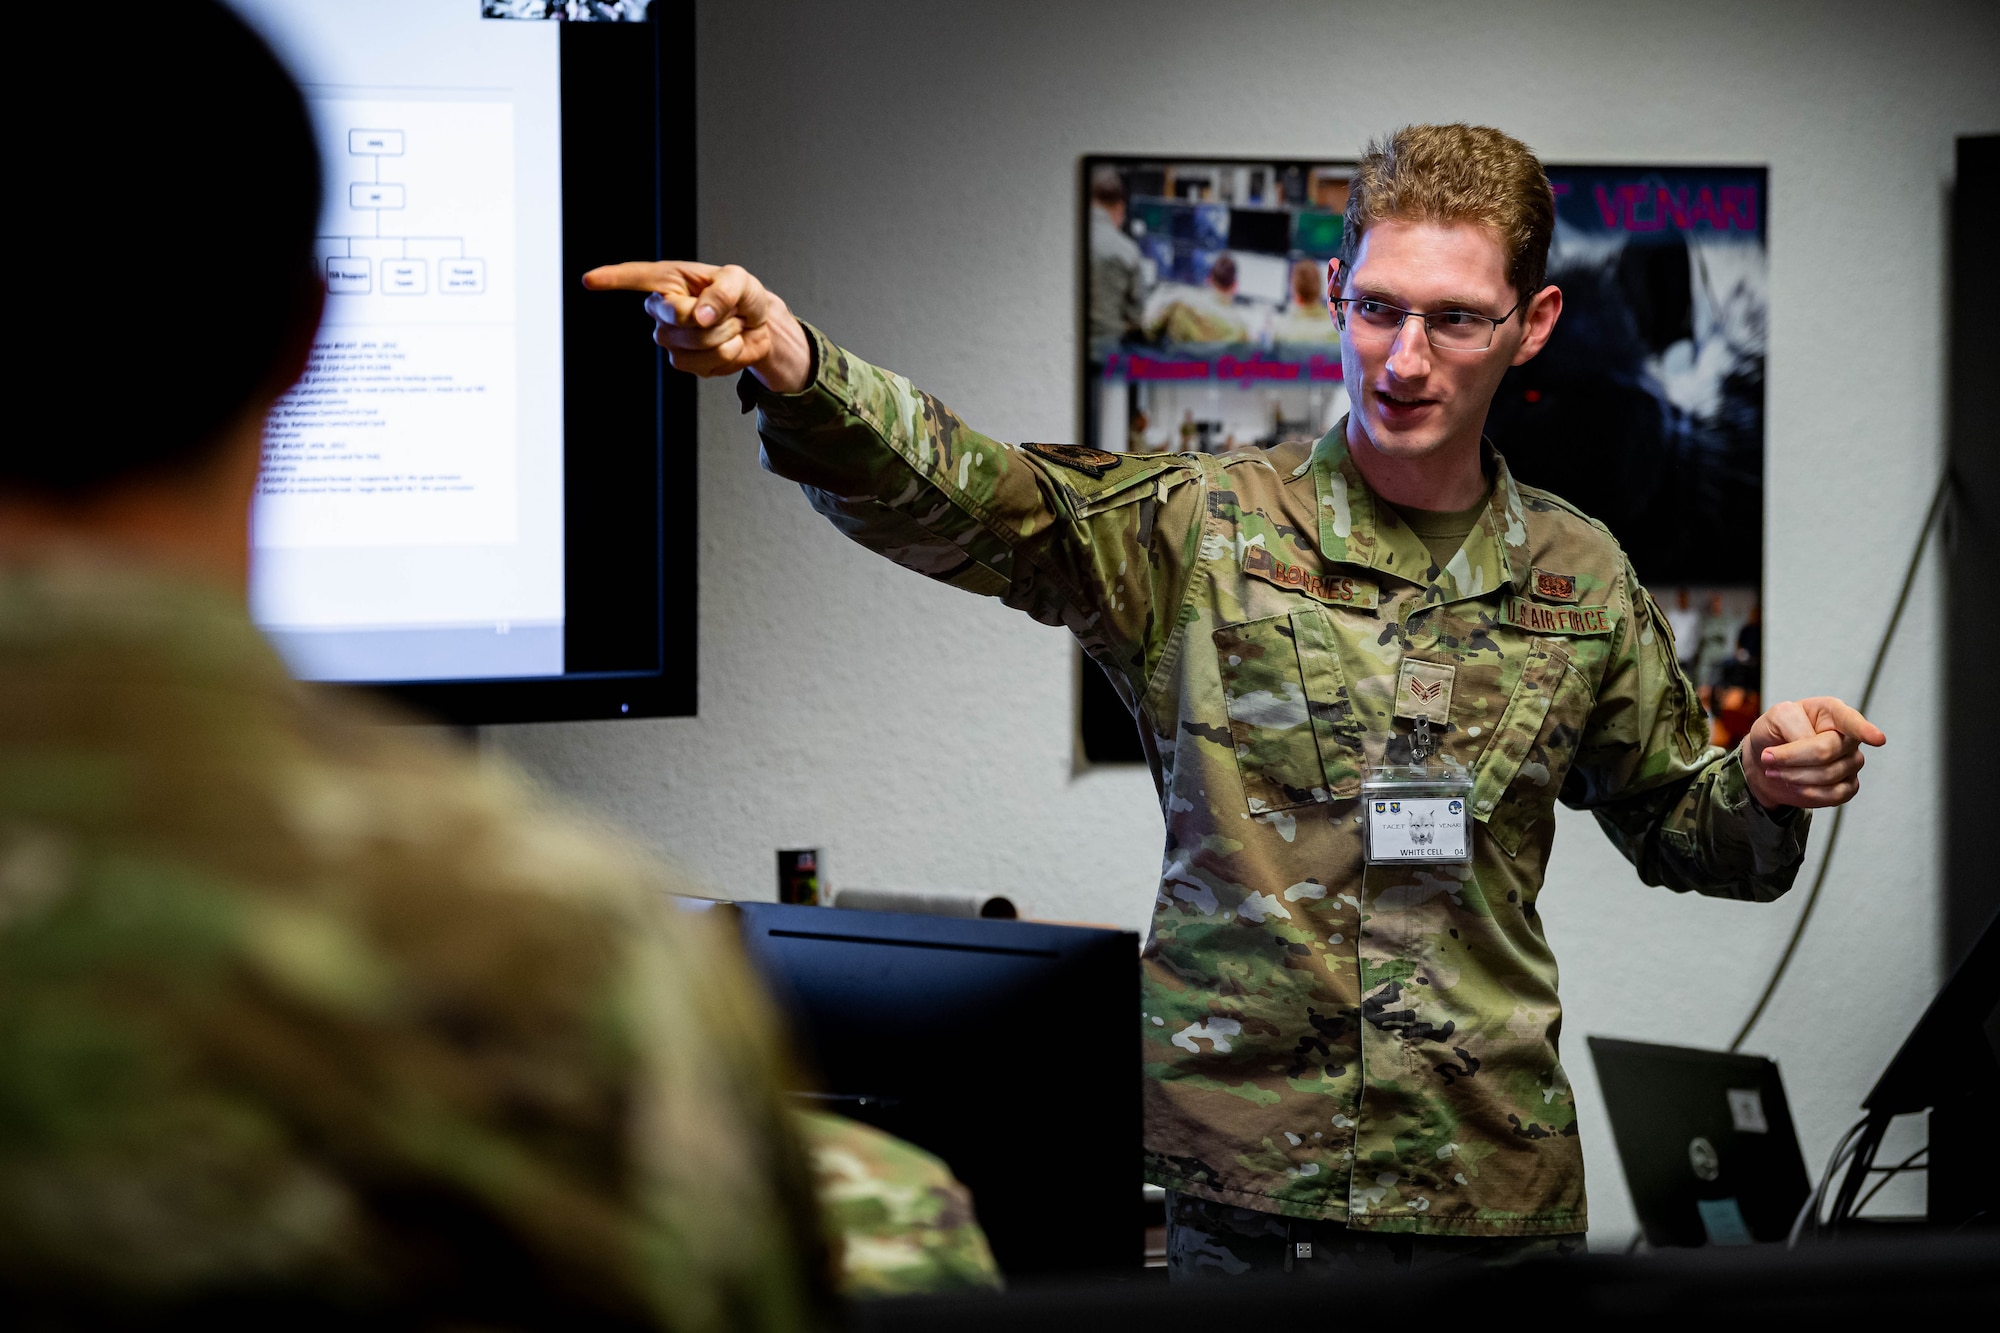 U.S. Air Force Senior Airman Frederic Borries, 52nd Communications Squadron chief of training assigned to Spangdahlem Air Base, Germany, instructs the Mission Defense Team during exercise Tacet Venari at Ramstein Air Base, Germany, May 10, 2022. Tacet Venari is a two-week cyber exercise providing Airmen with four phases of learning, to include education, demonstration, guidance and empowerment.  (U.S. Air Force photo by Airman 1st Class Jared Lovett)